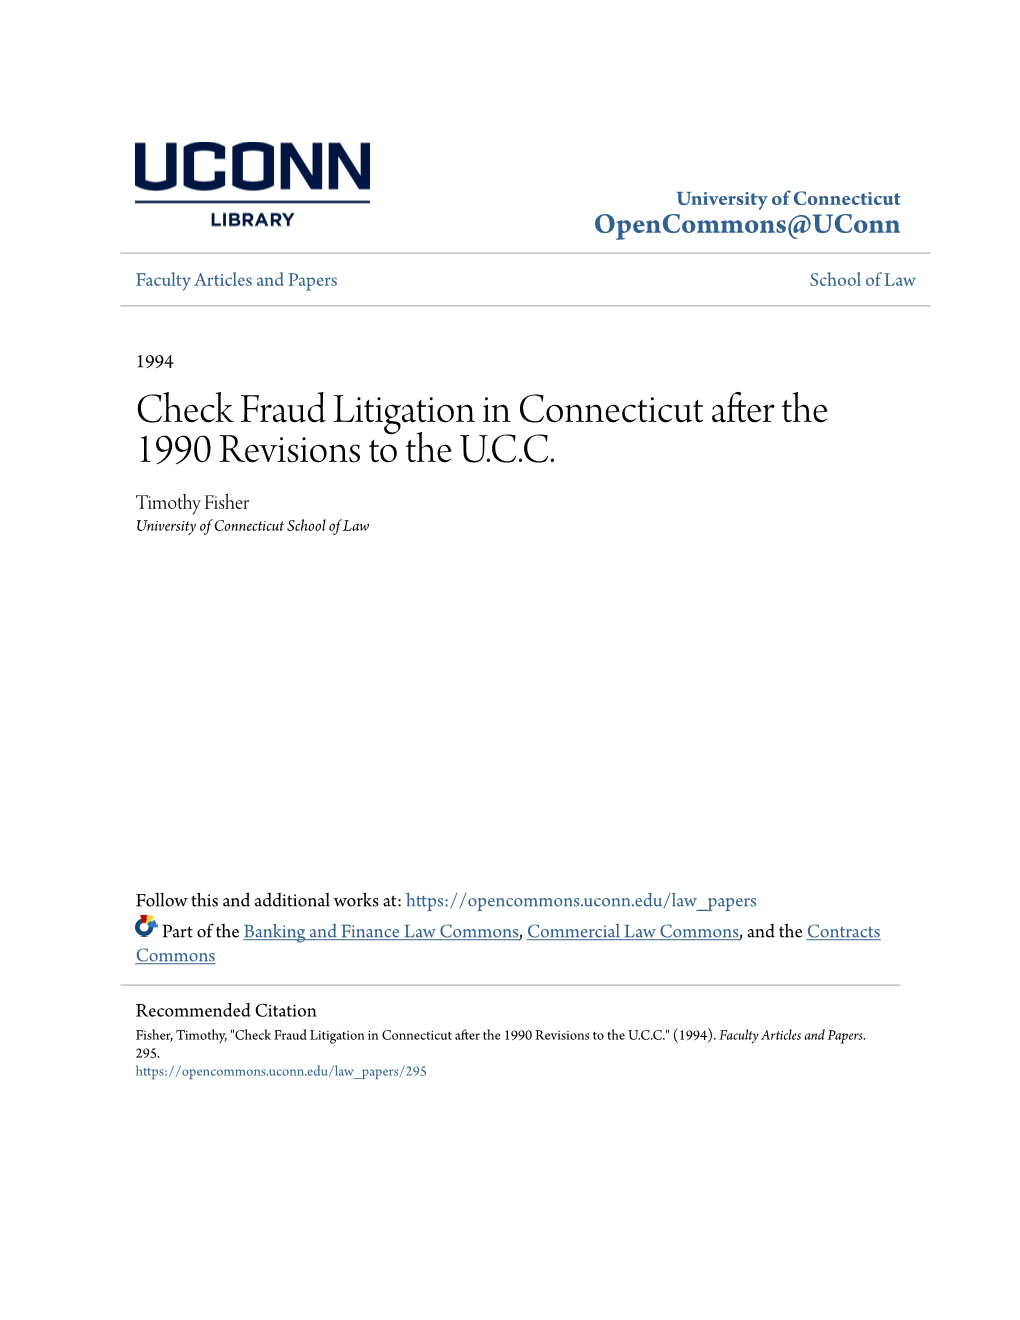 Check Fraud Litigation in Connecticut After the 1990 Revisions to the U.C.C. Timothy Fisher University of Connecticut School of Law